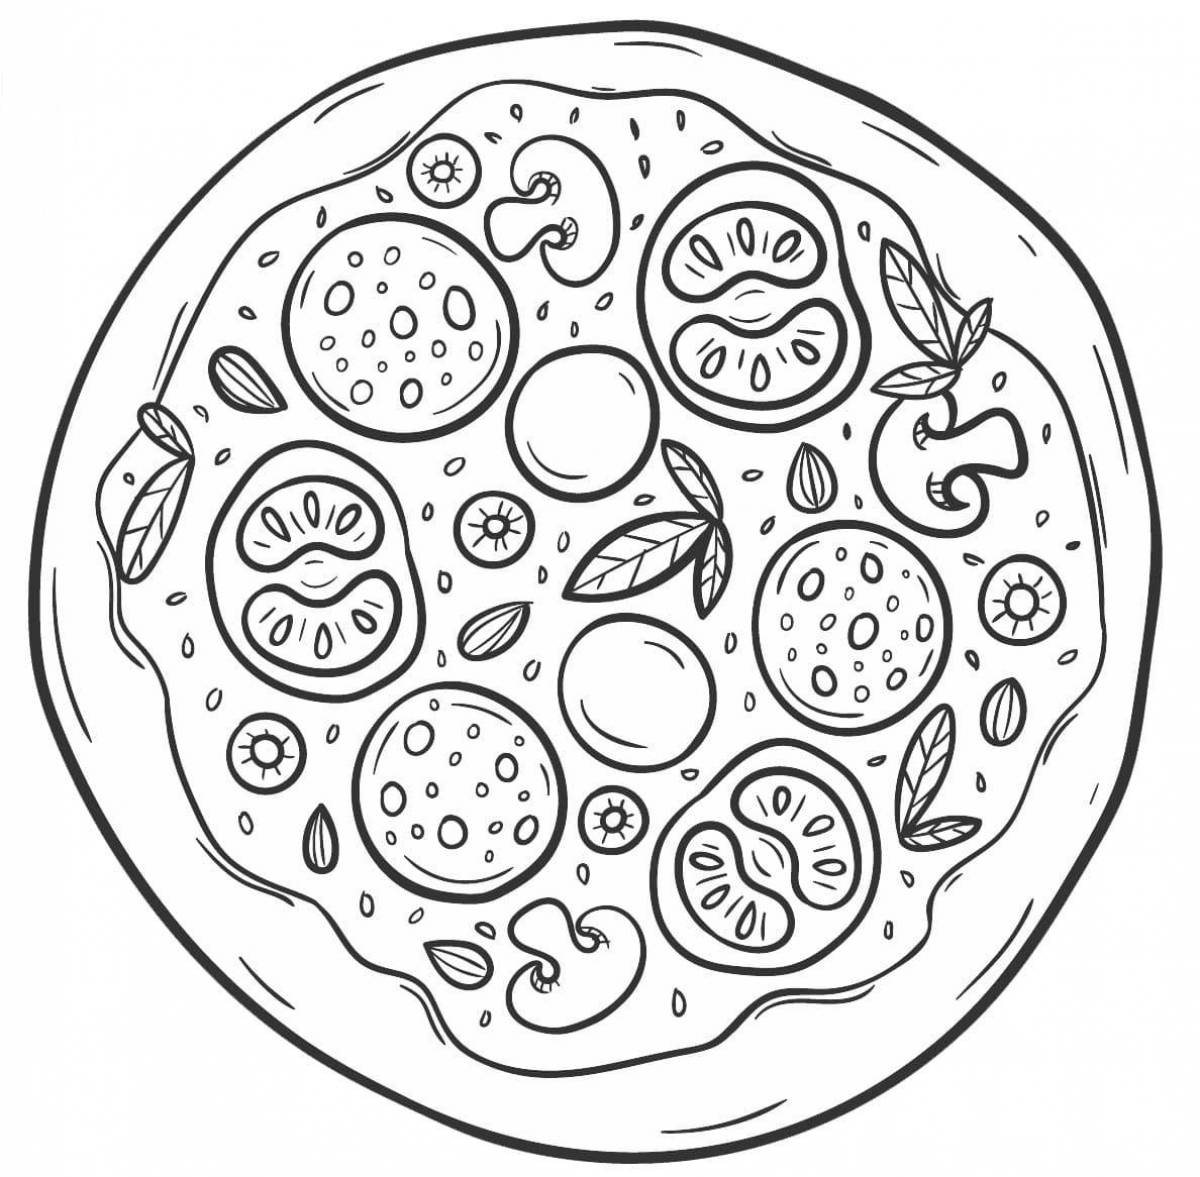 Bright pizza coloring page for kids